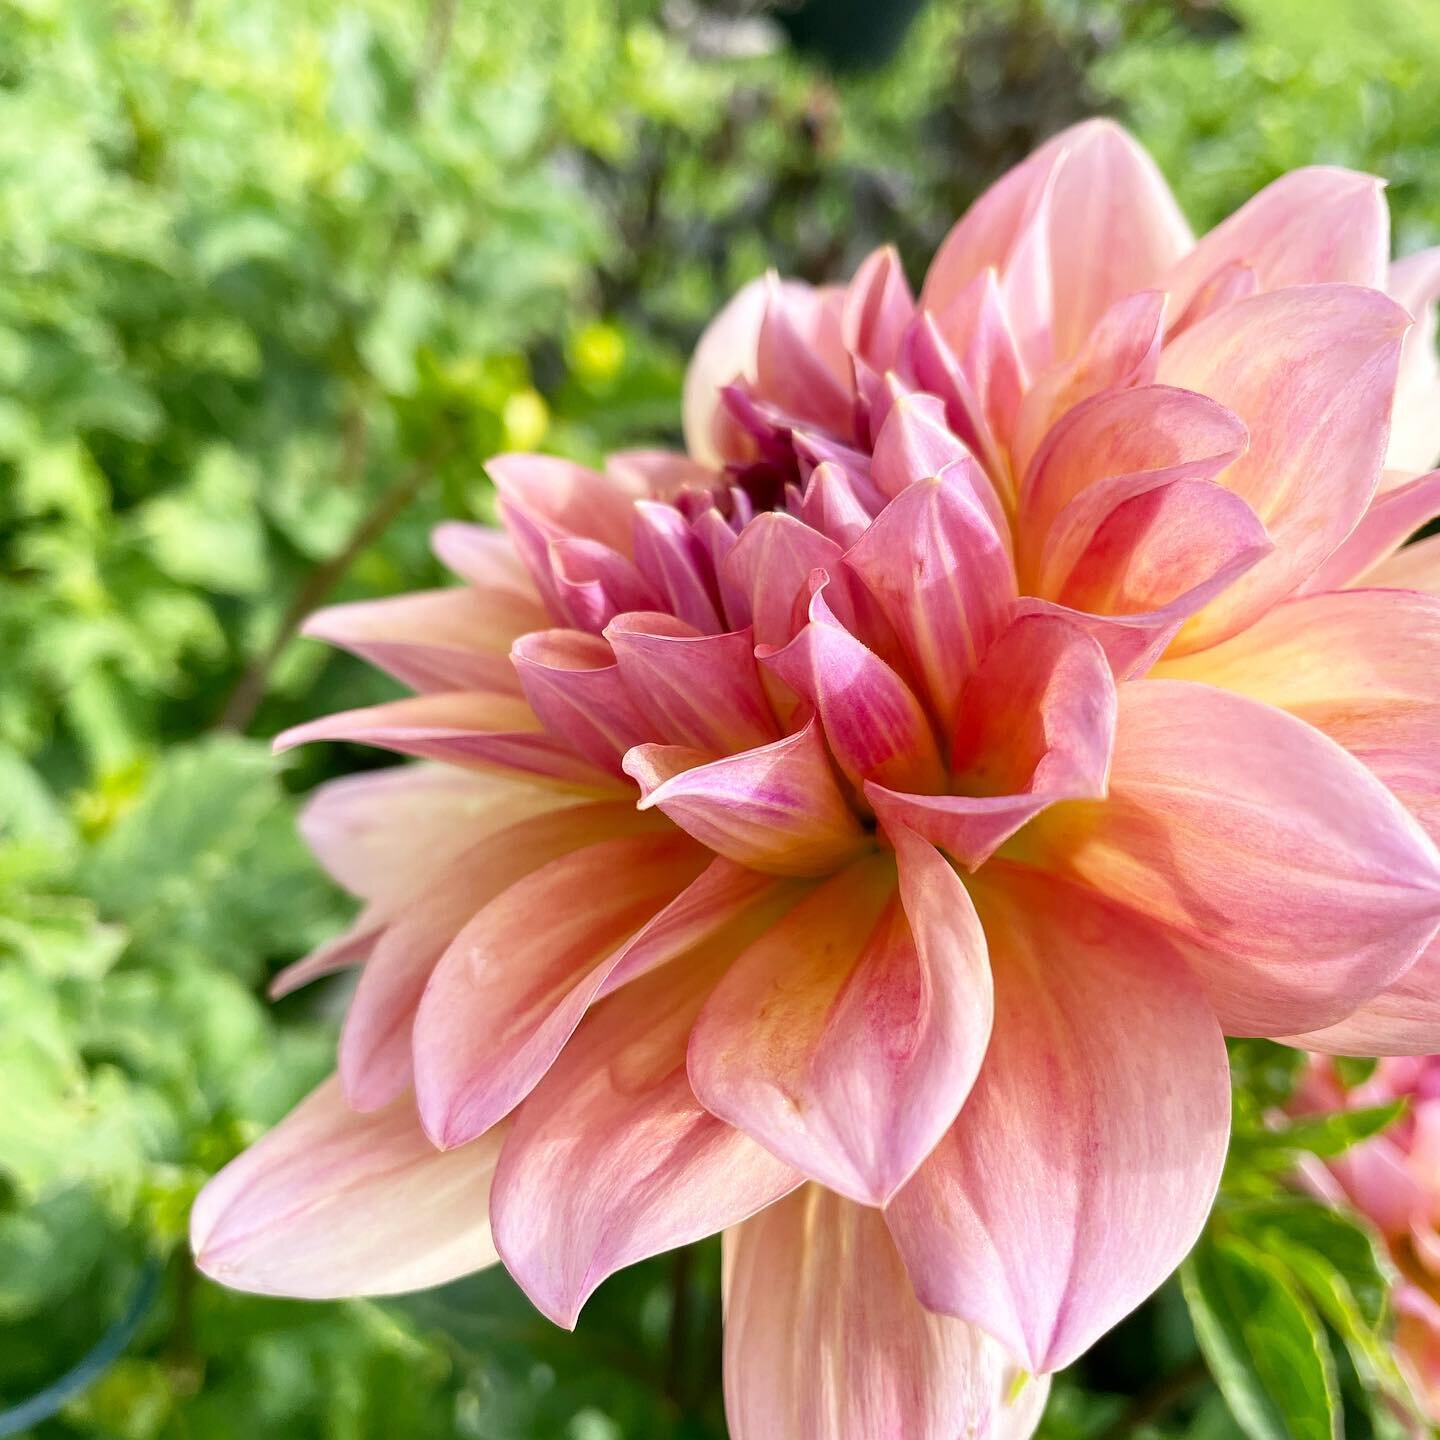 She&rsquo;s so pretty 😭 excited to be getting married during dahlia season!